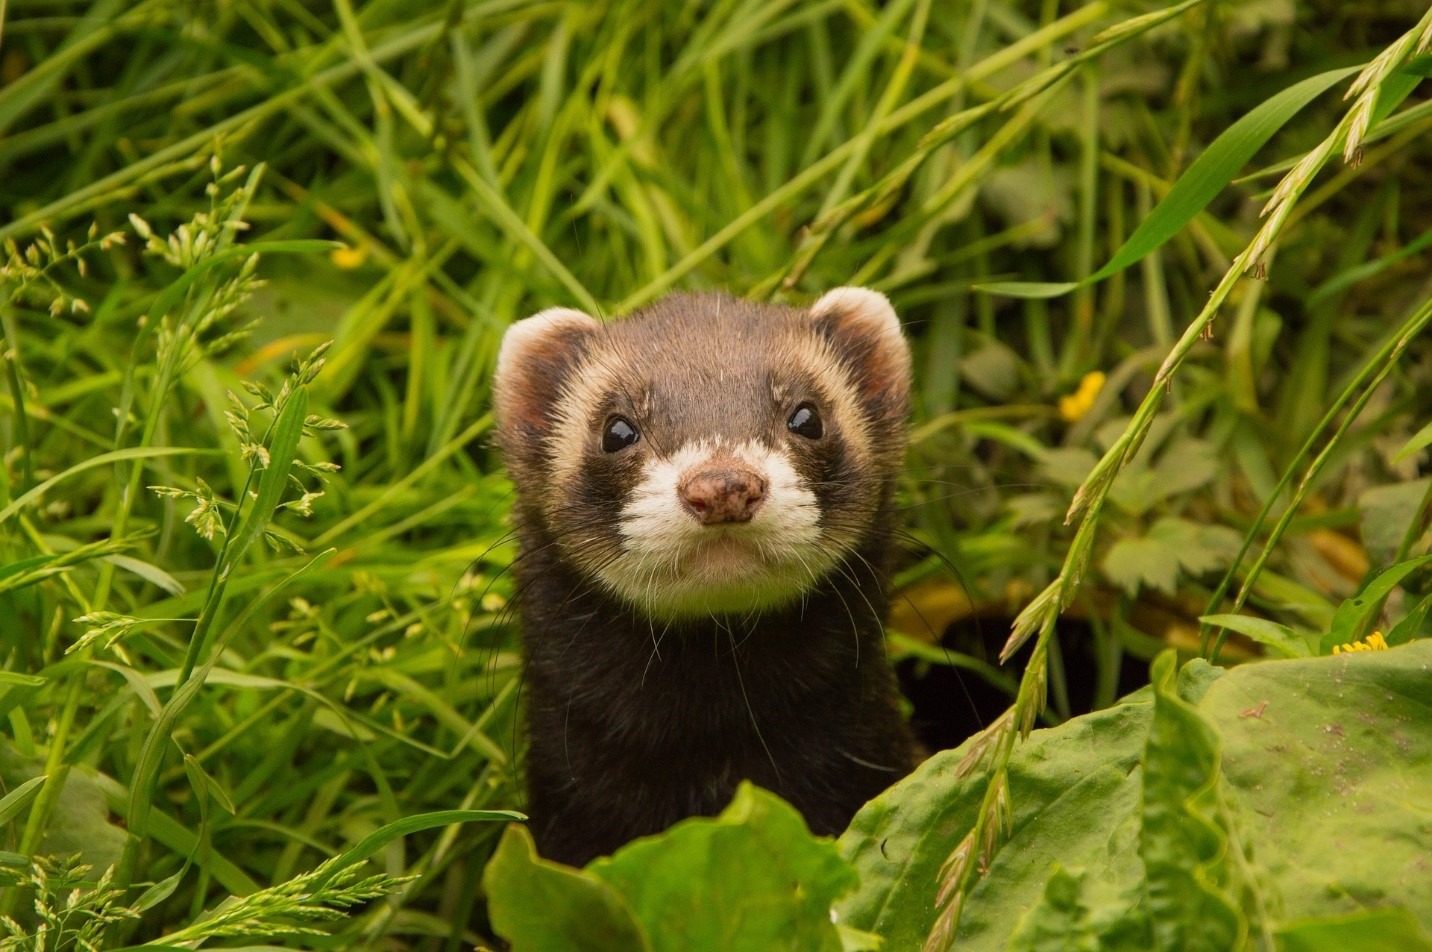 Repairing and Maintaining a Golf CourseFerret Care Tips